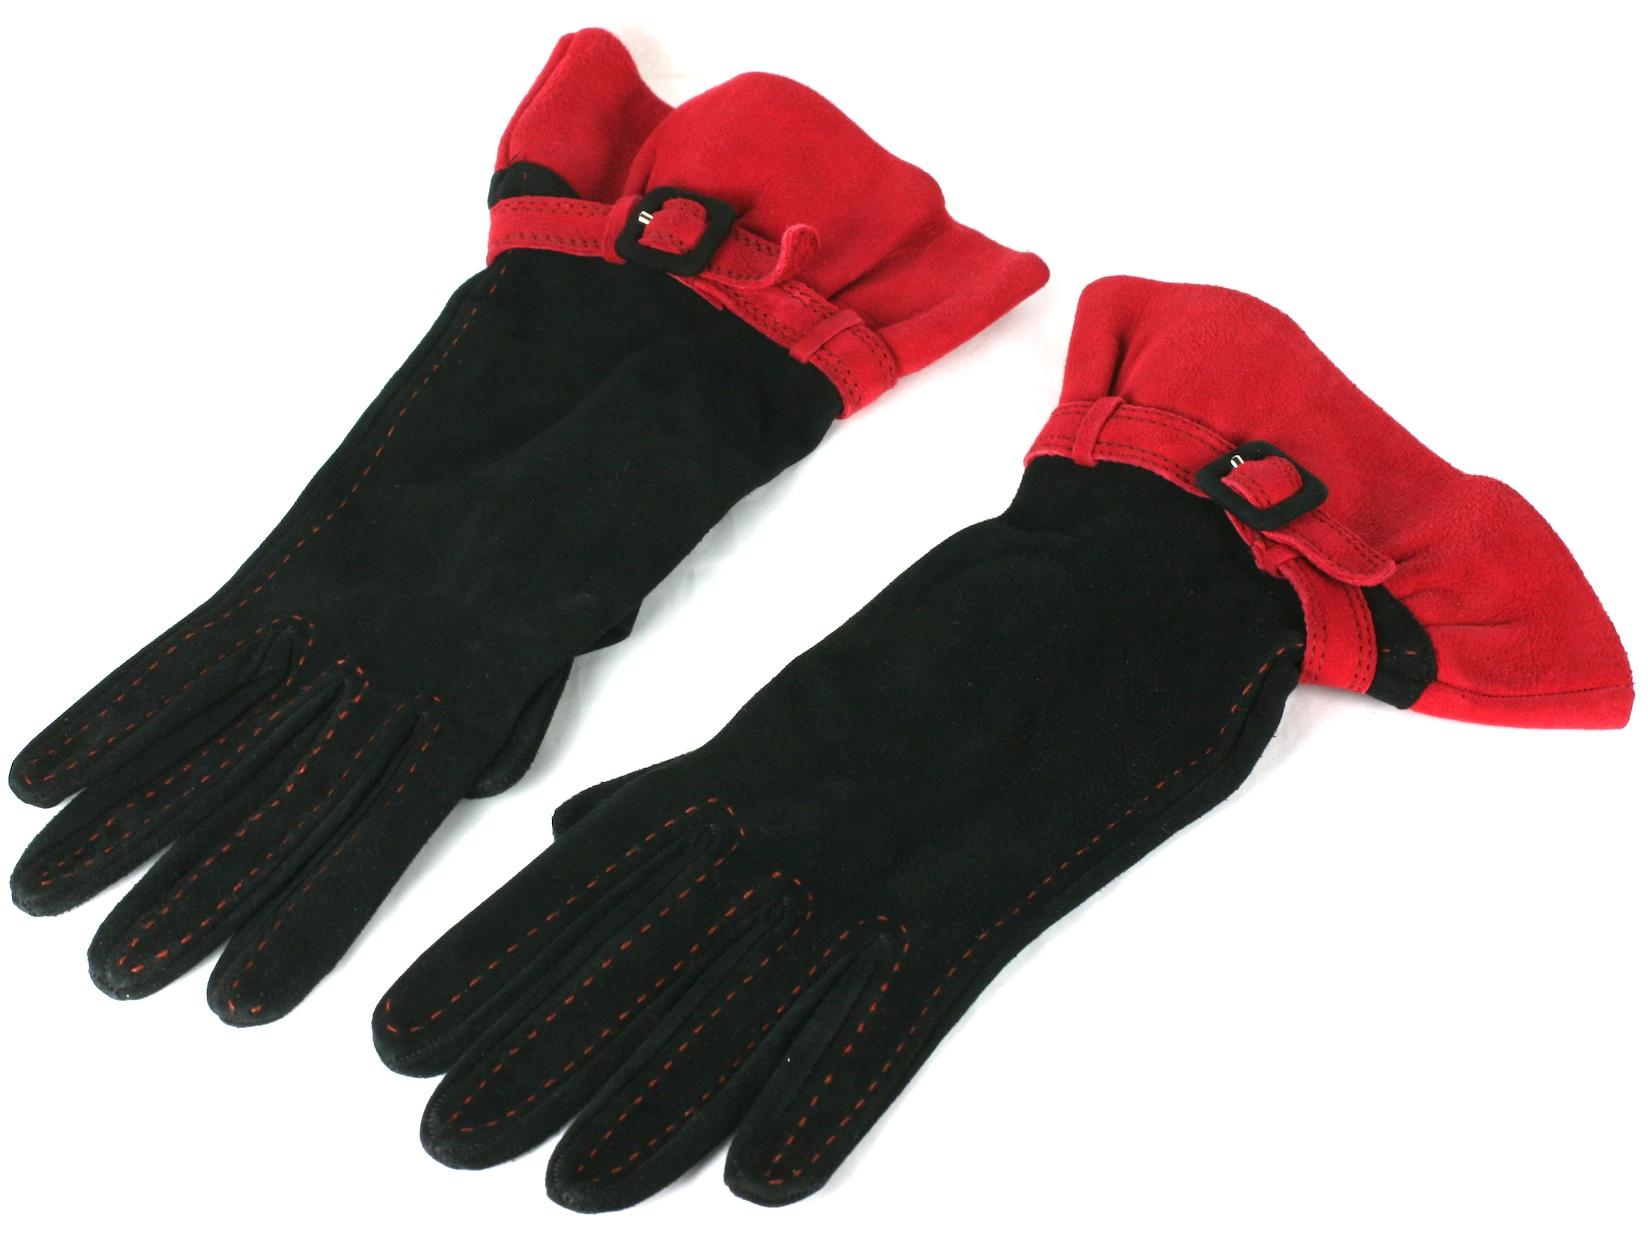 Moschino dramatic black and red suede ruffled gloves. The black suede body of the glove  top stitched in red,  belted at the wrist and ruffled in tomato red suede.
Labeled Moschino , Made in Italy. 
Excellent Condition. 
Size 8, Silk lined. 
Width